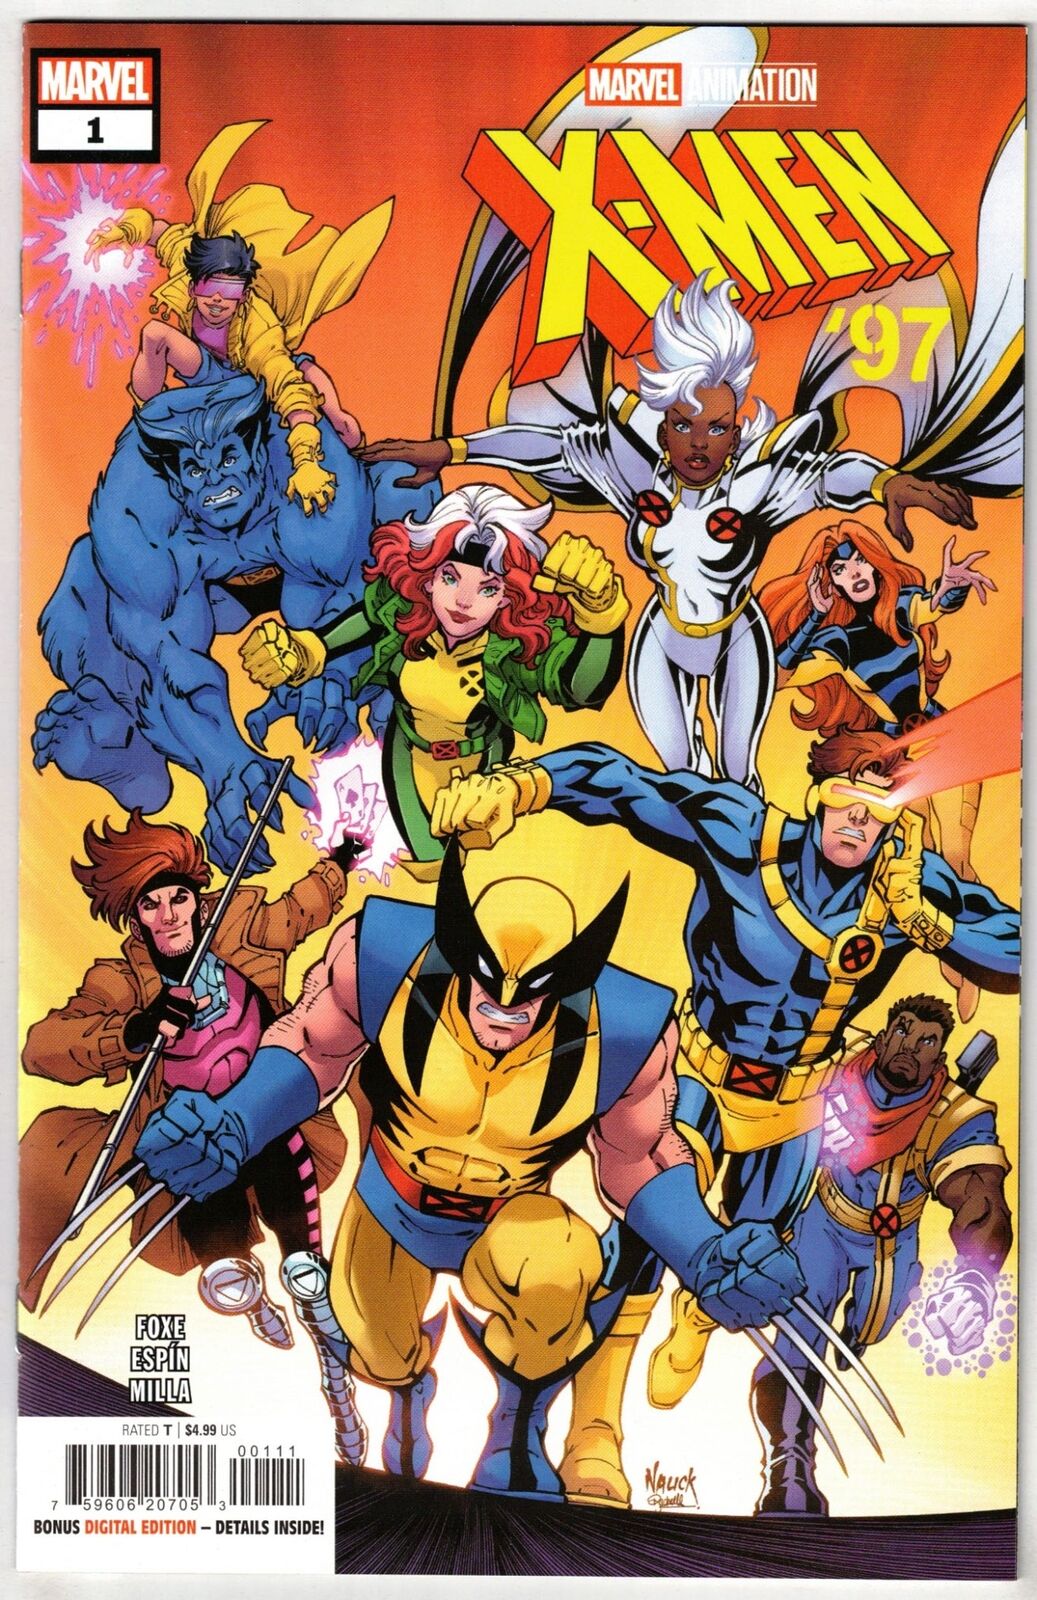 X-MEN '97 #1- COVER A 1ST PRINT- PREQUEL TO SHOW- MARVEL ANIMATION